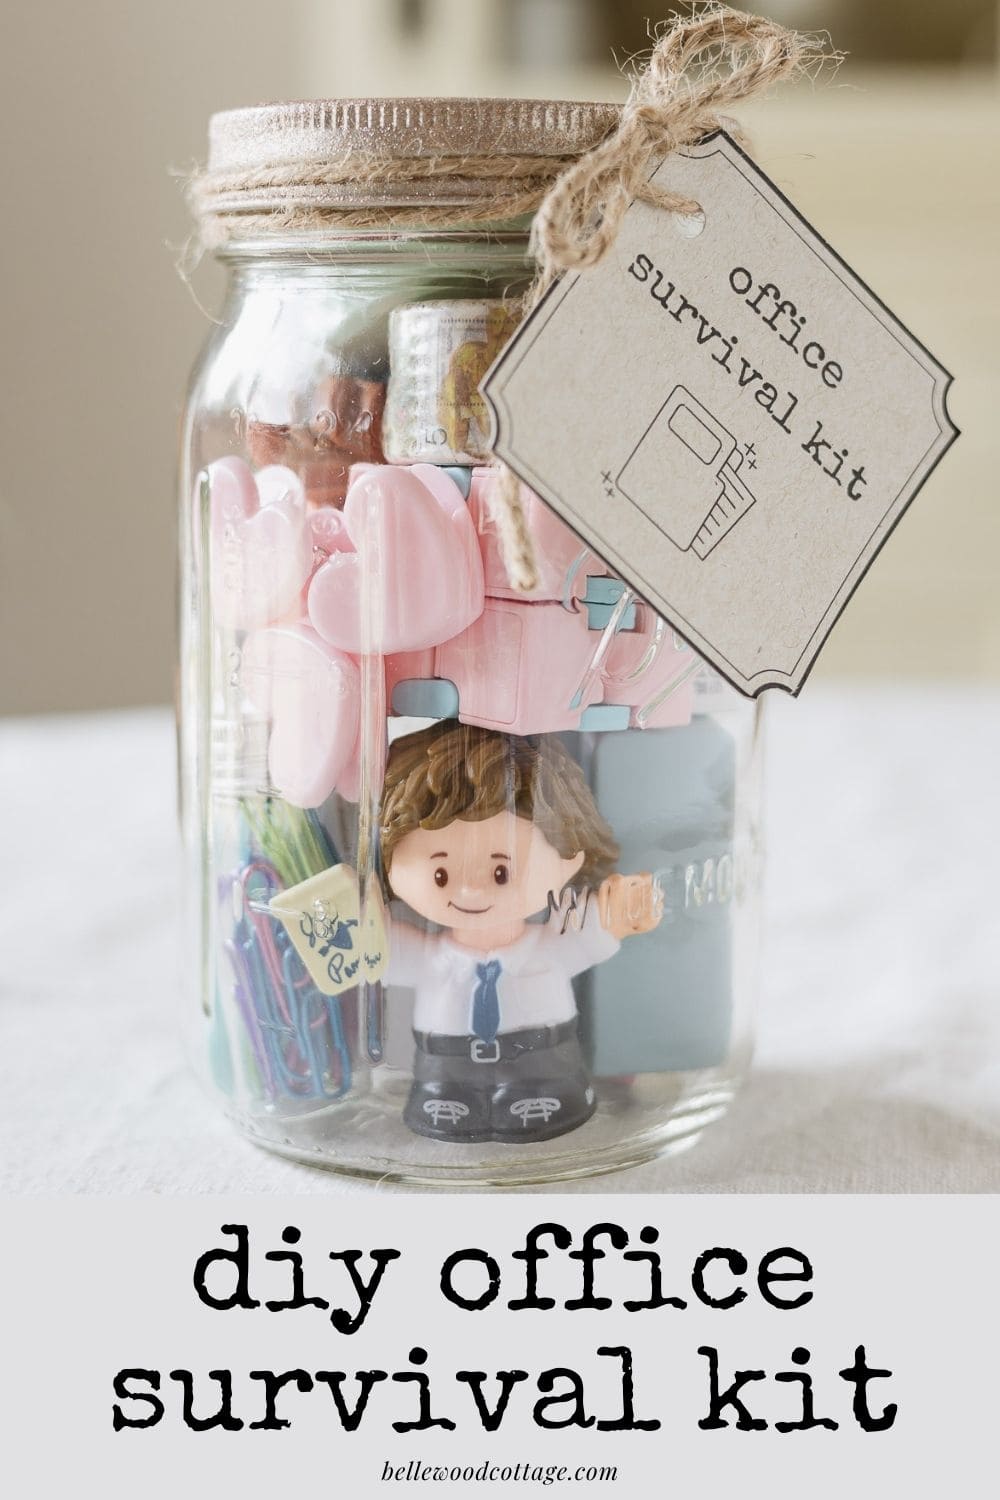 A mason jar filled with office supplies and gift tag with the words, "DIY Office Survival Kit" on the image.